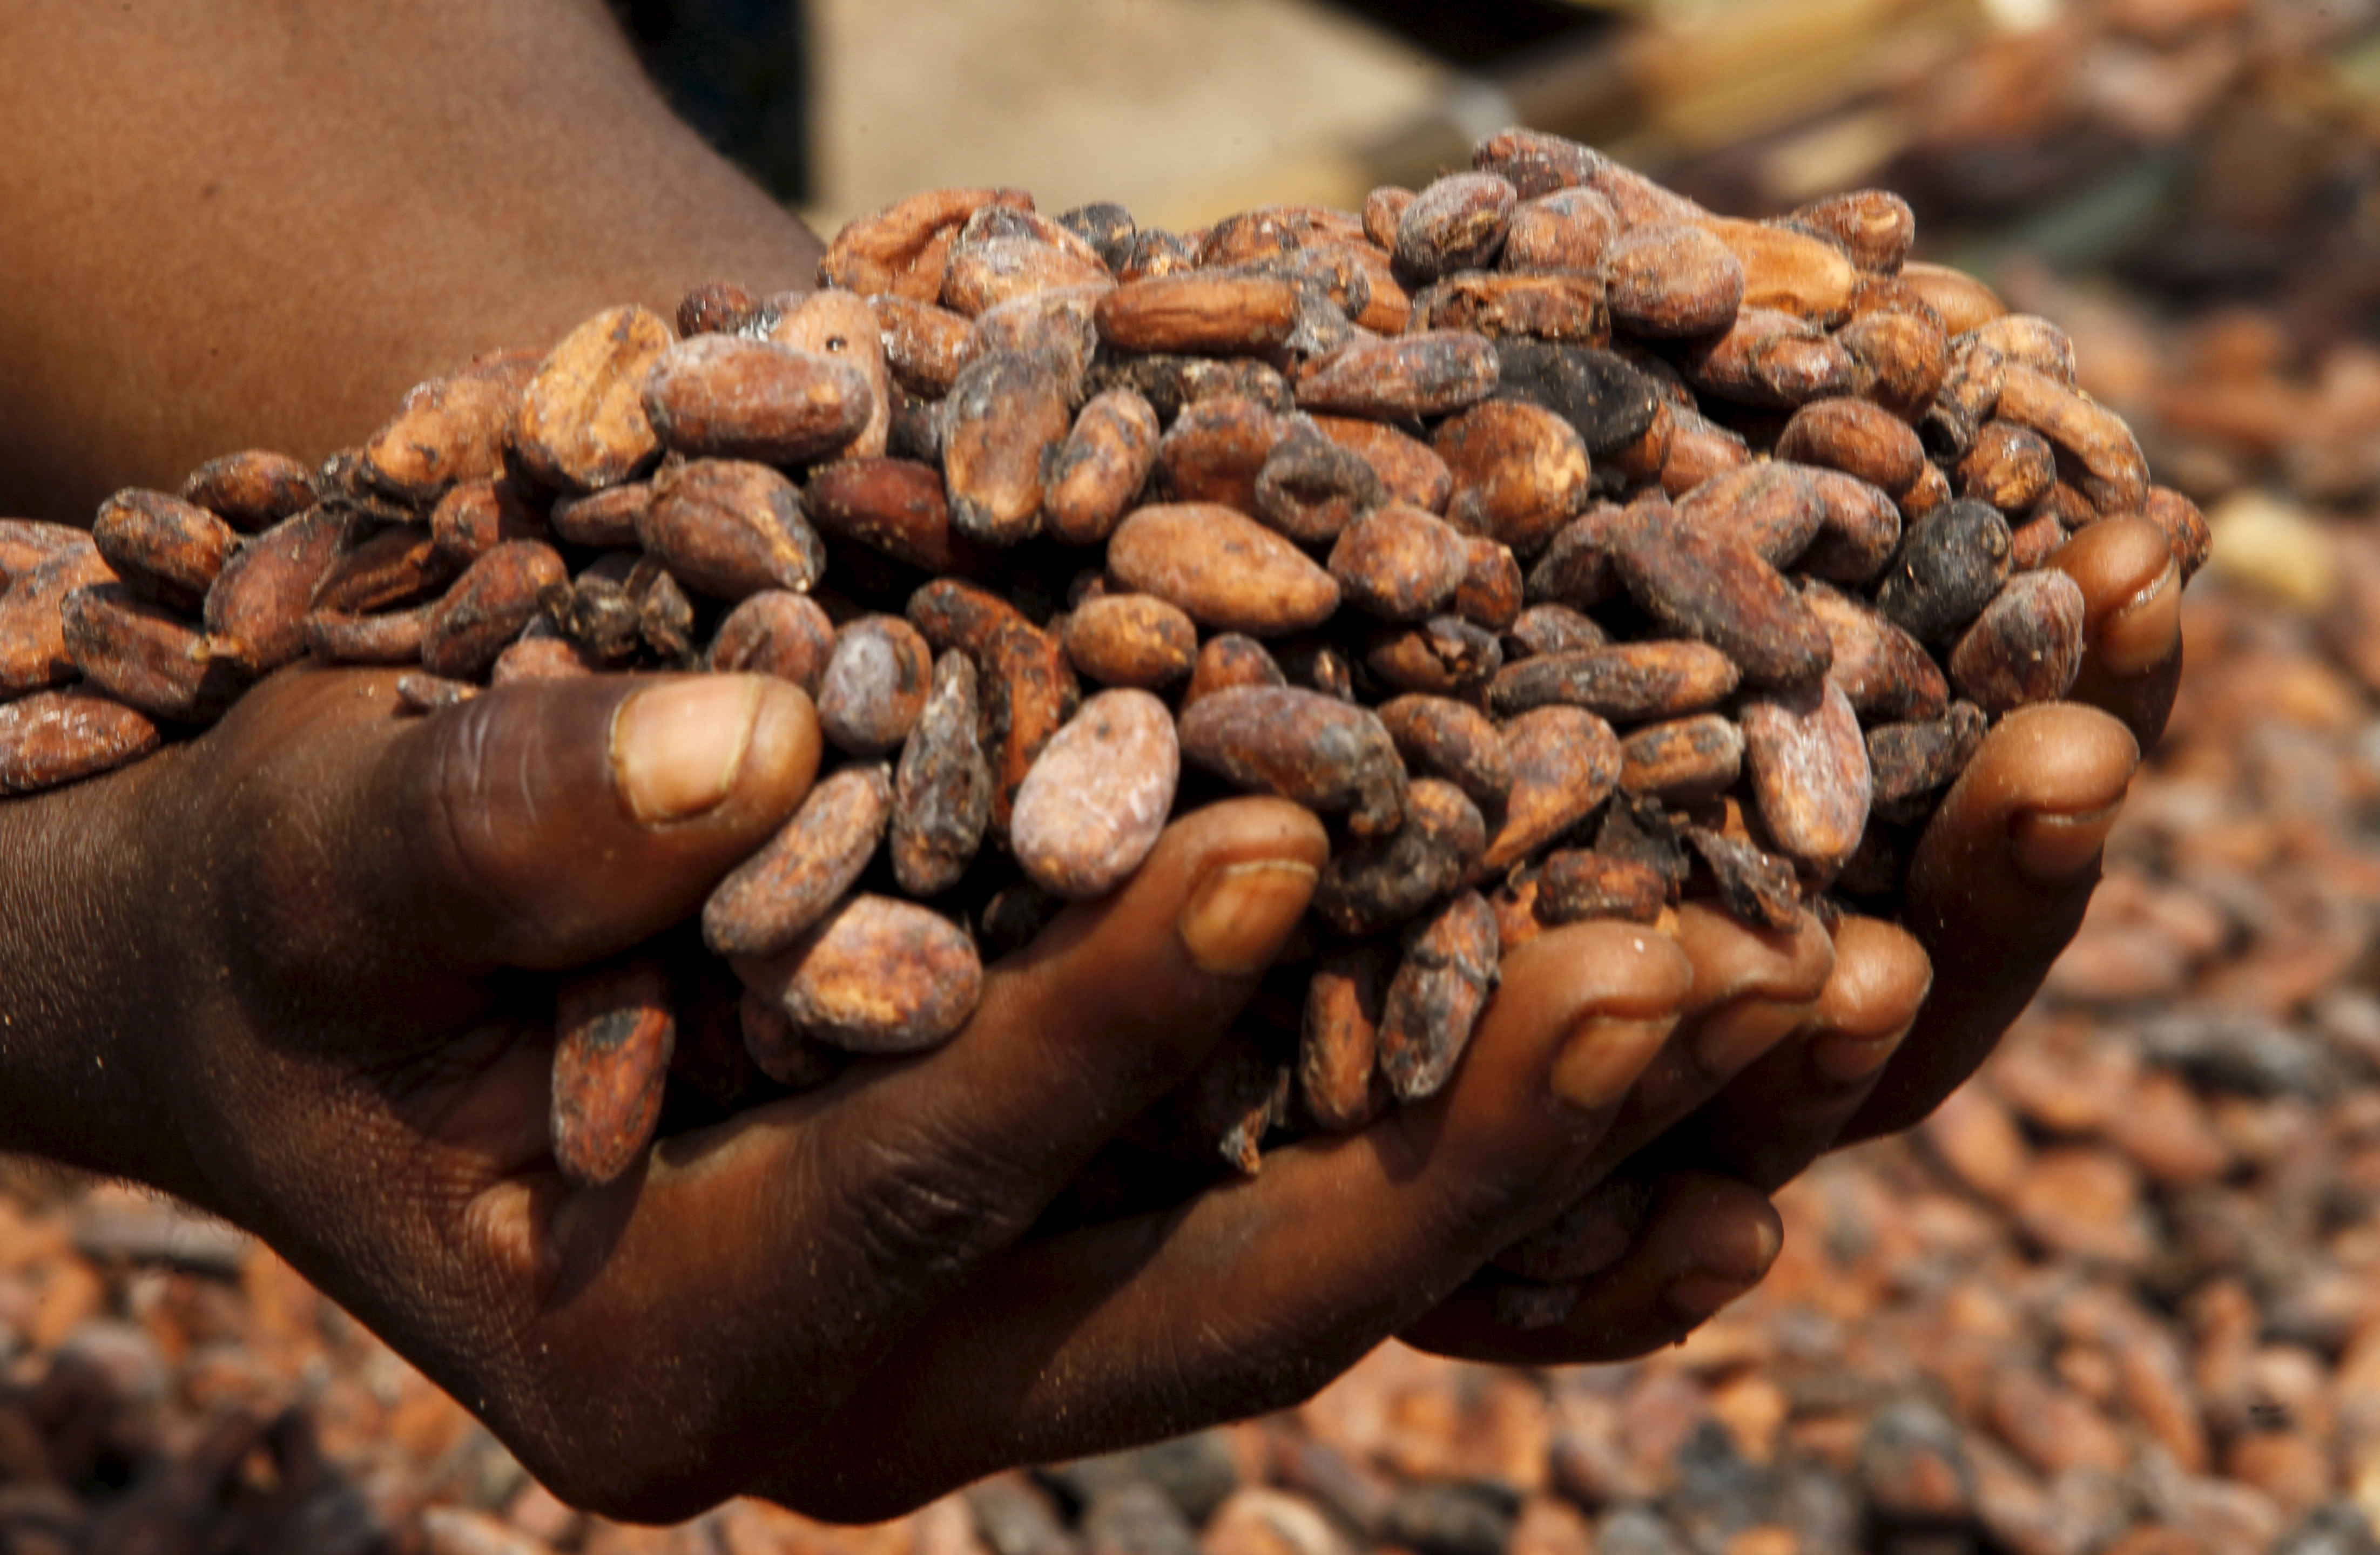 A worker holds cocoa beans at a village in N'Douci, Ivory Coast